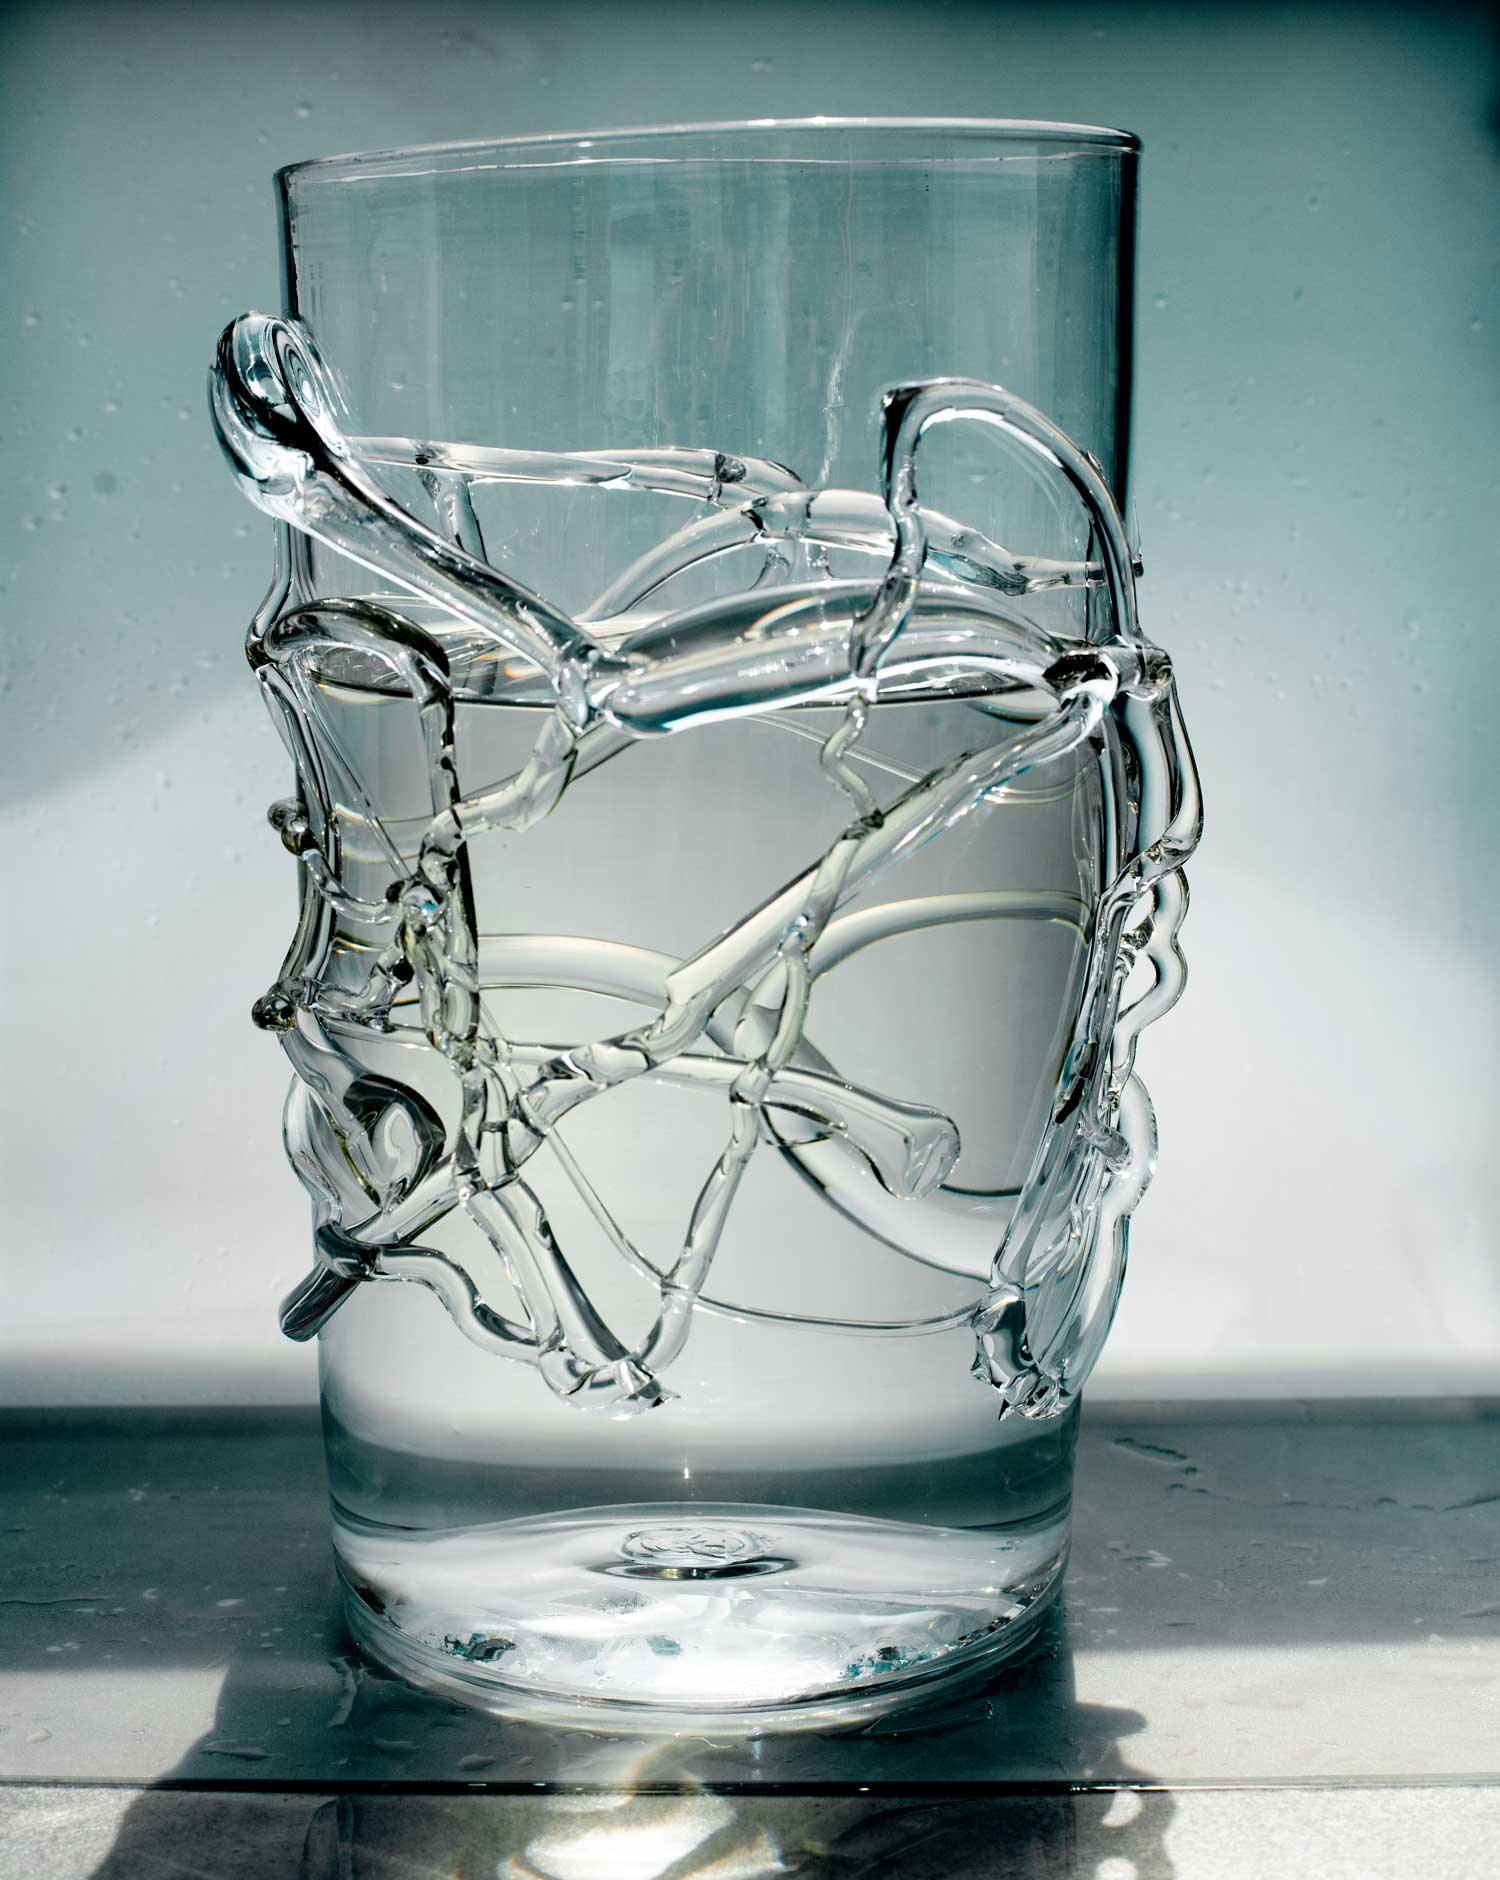 Large vase with details of glass melted with water white background and shadow